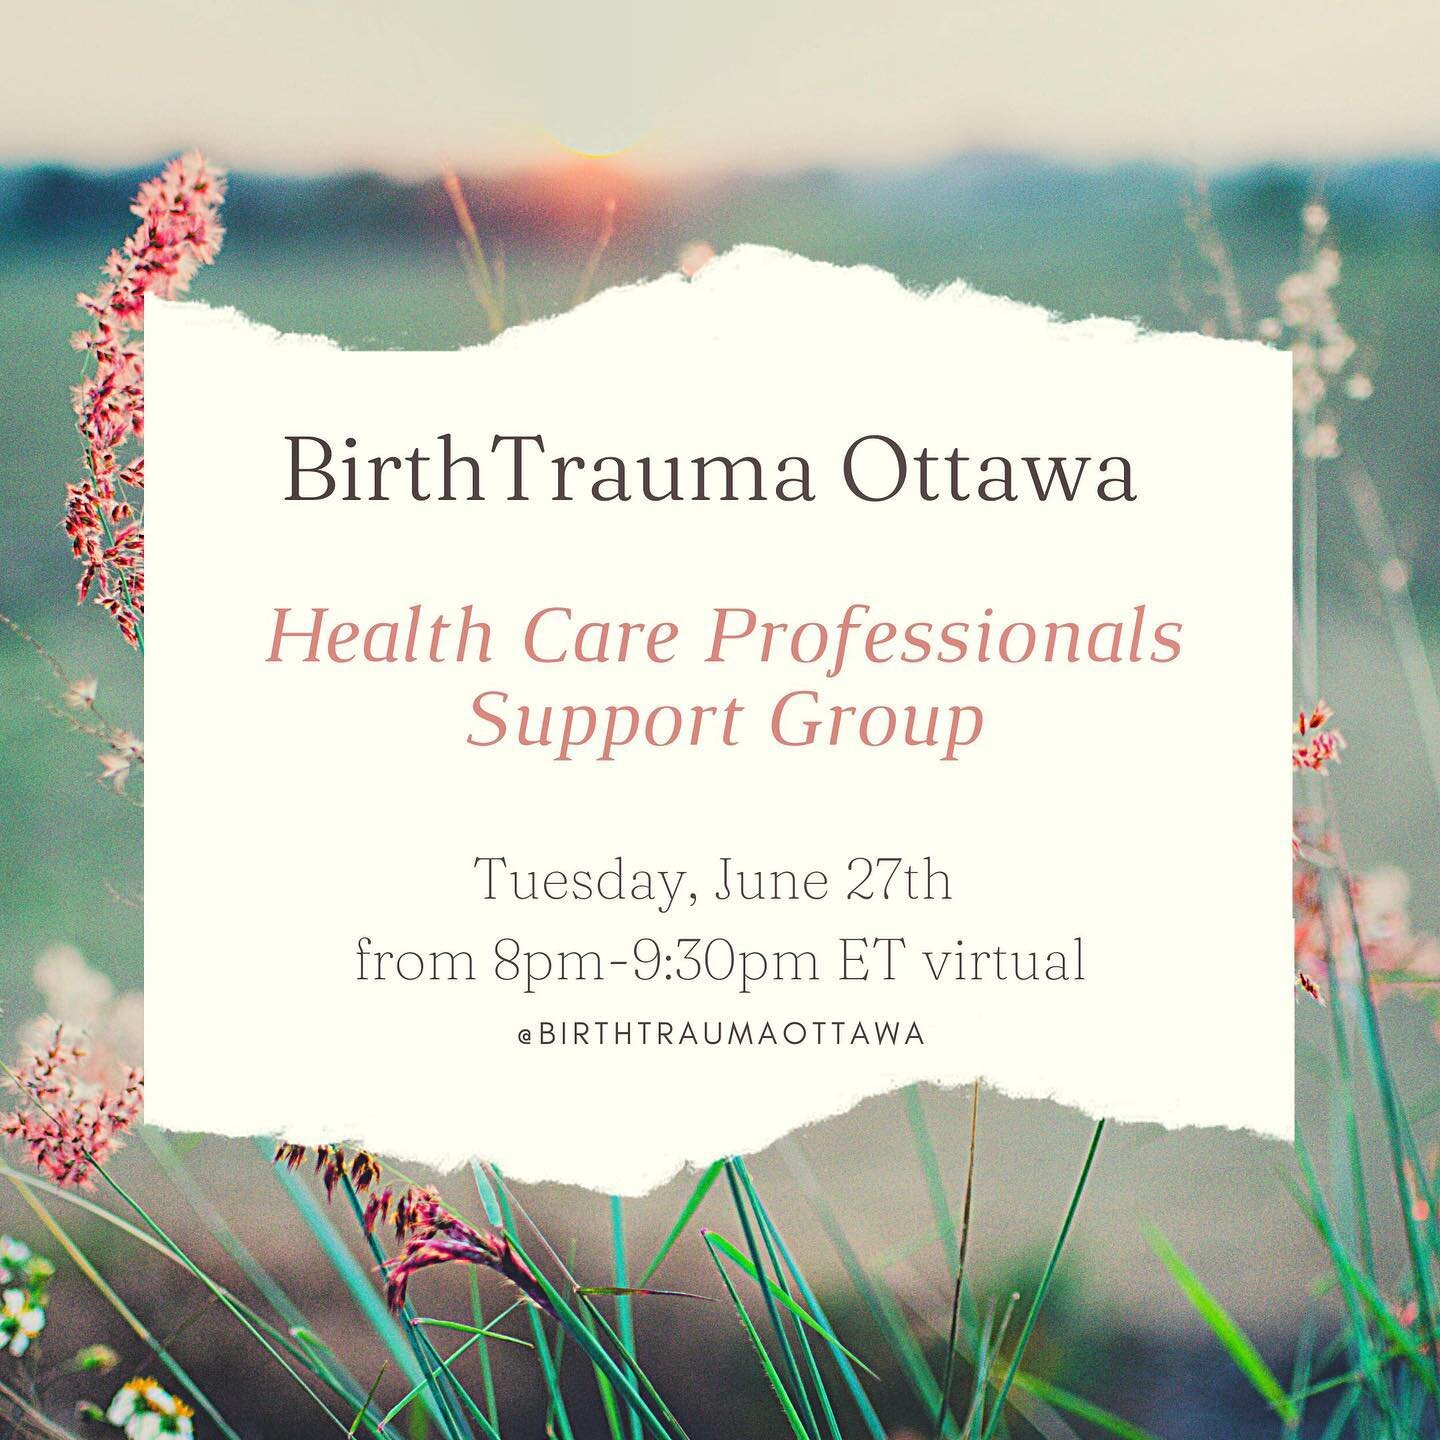 Birth Trauma Ottawa&rsquo;s Health Care Professionals Support Group is happening tonight, Tuesday, June 27th from 8pm - 9:30pm ET virtually.

Held on the last Tuesday of each month, this support group will hold space for those that work with the repr